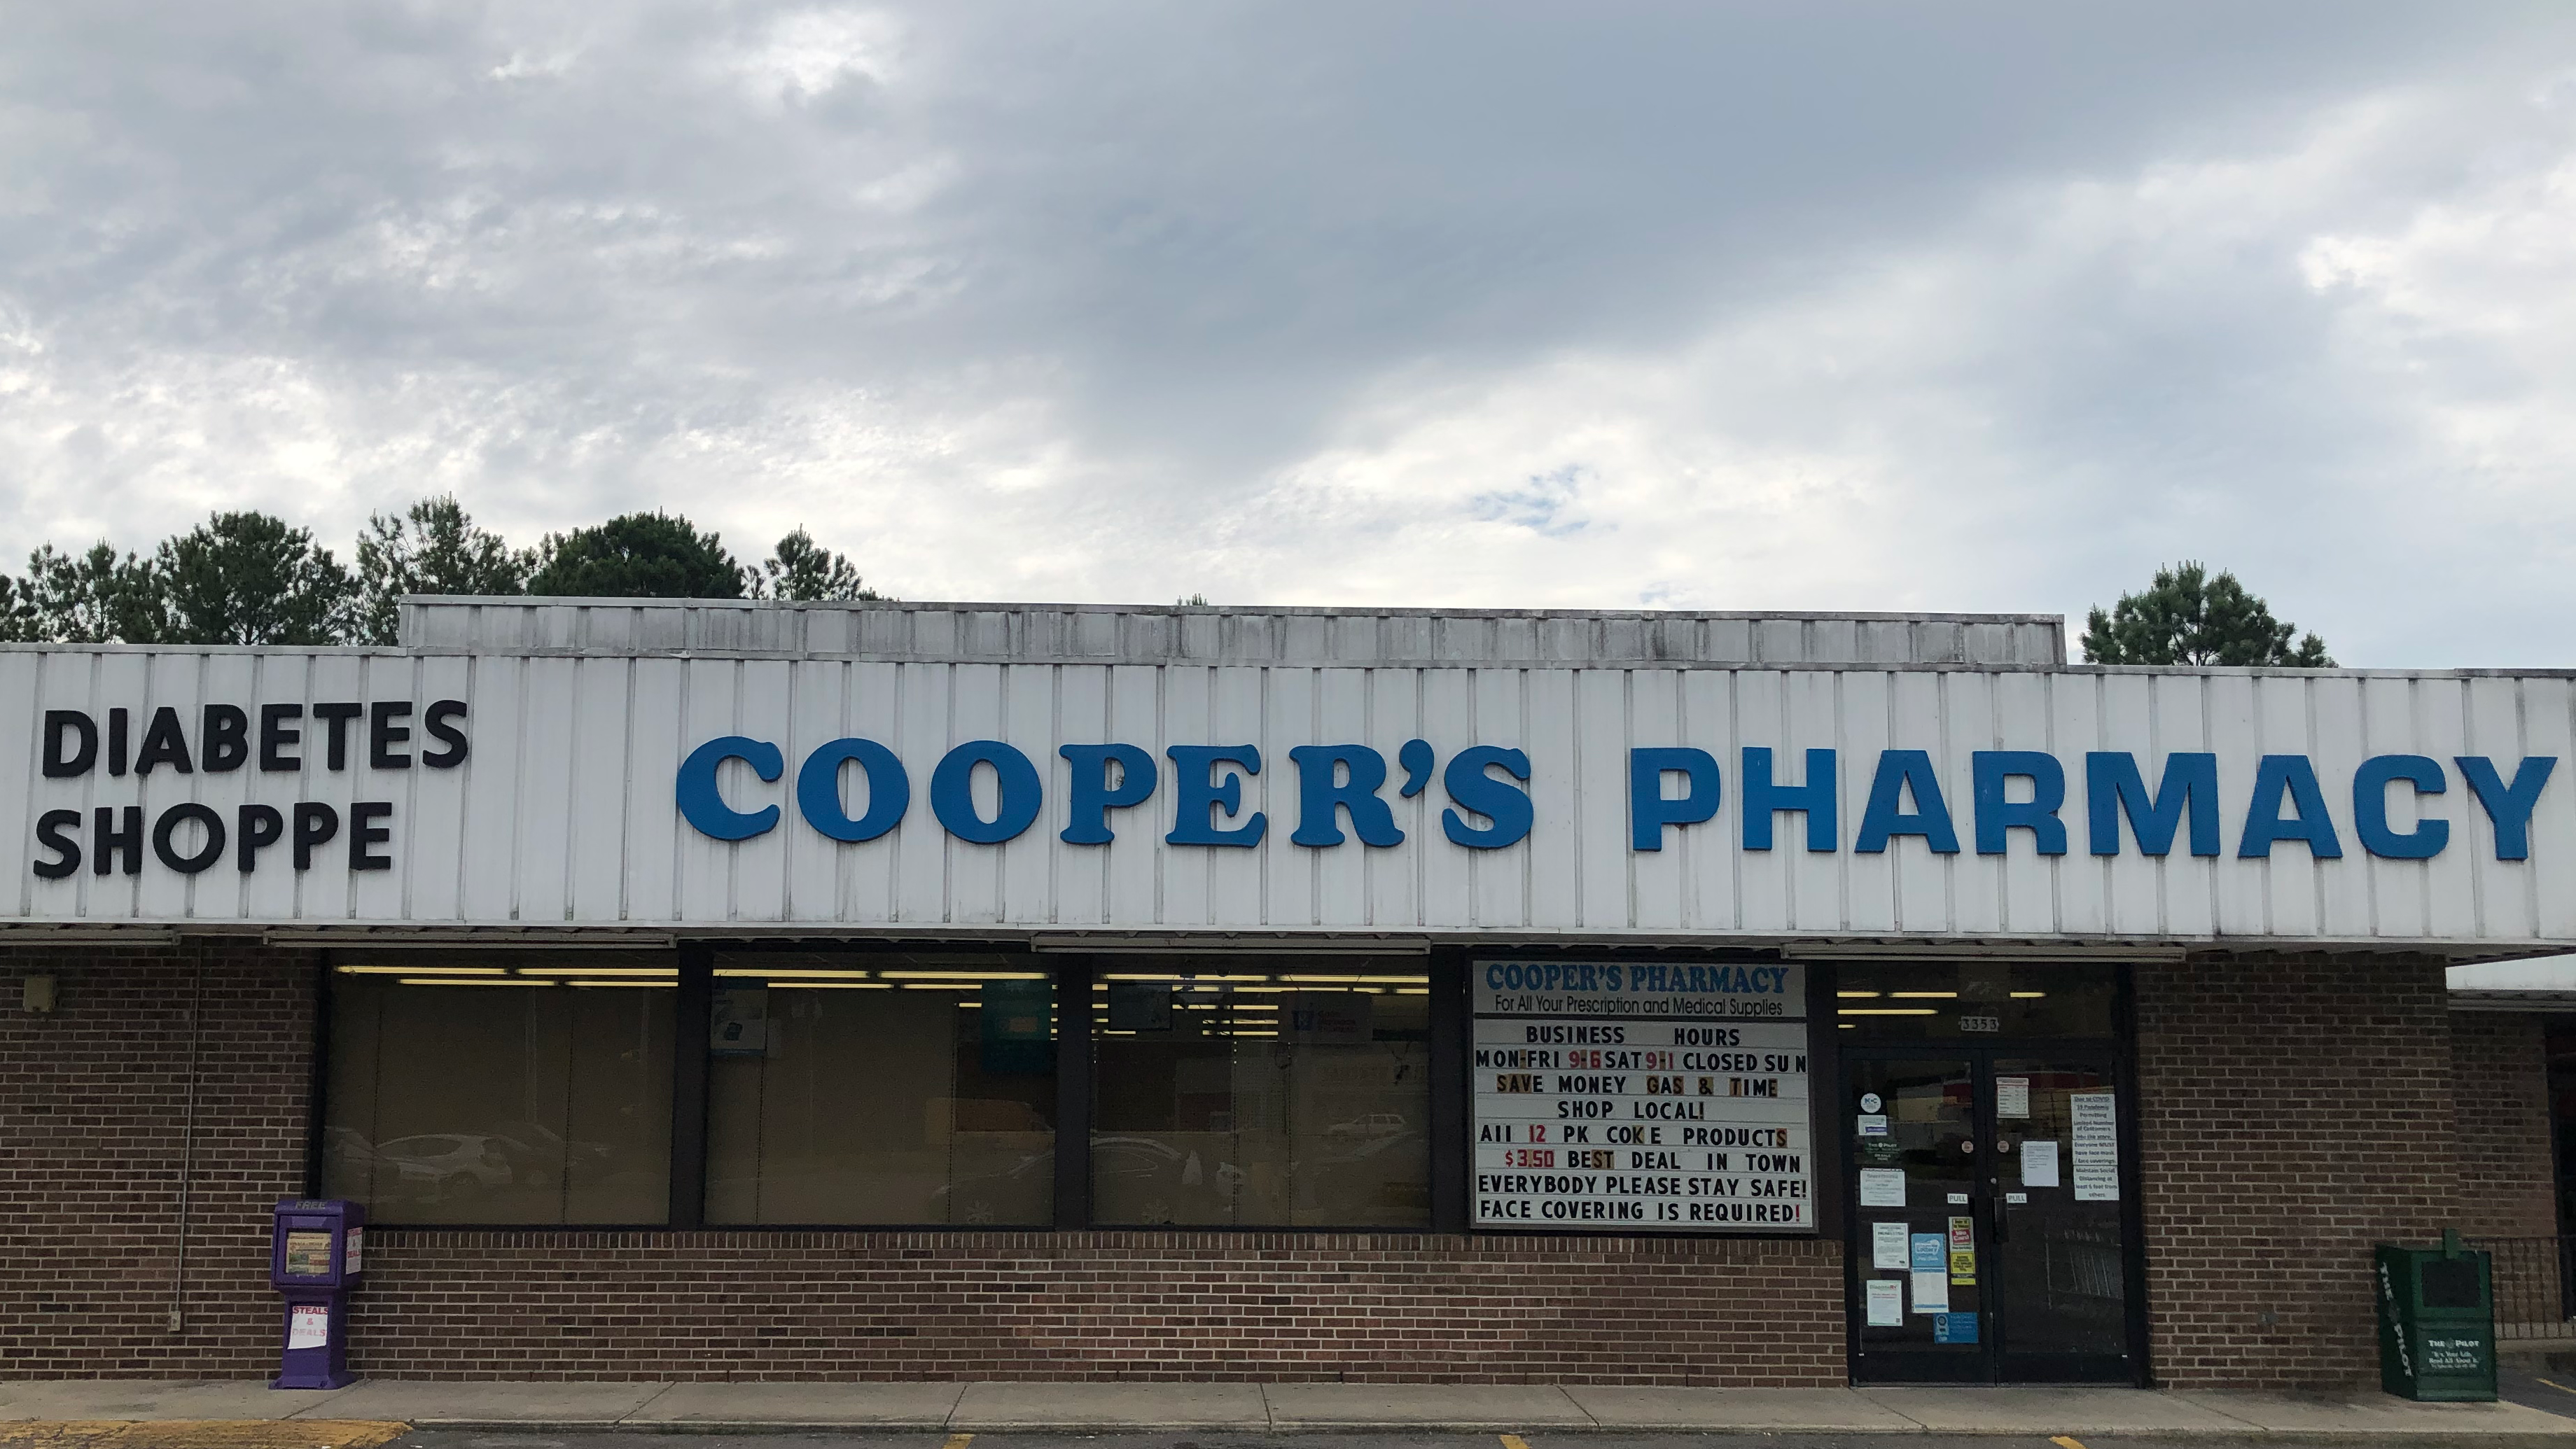 Coopers Pharmacy storefront